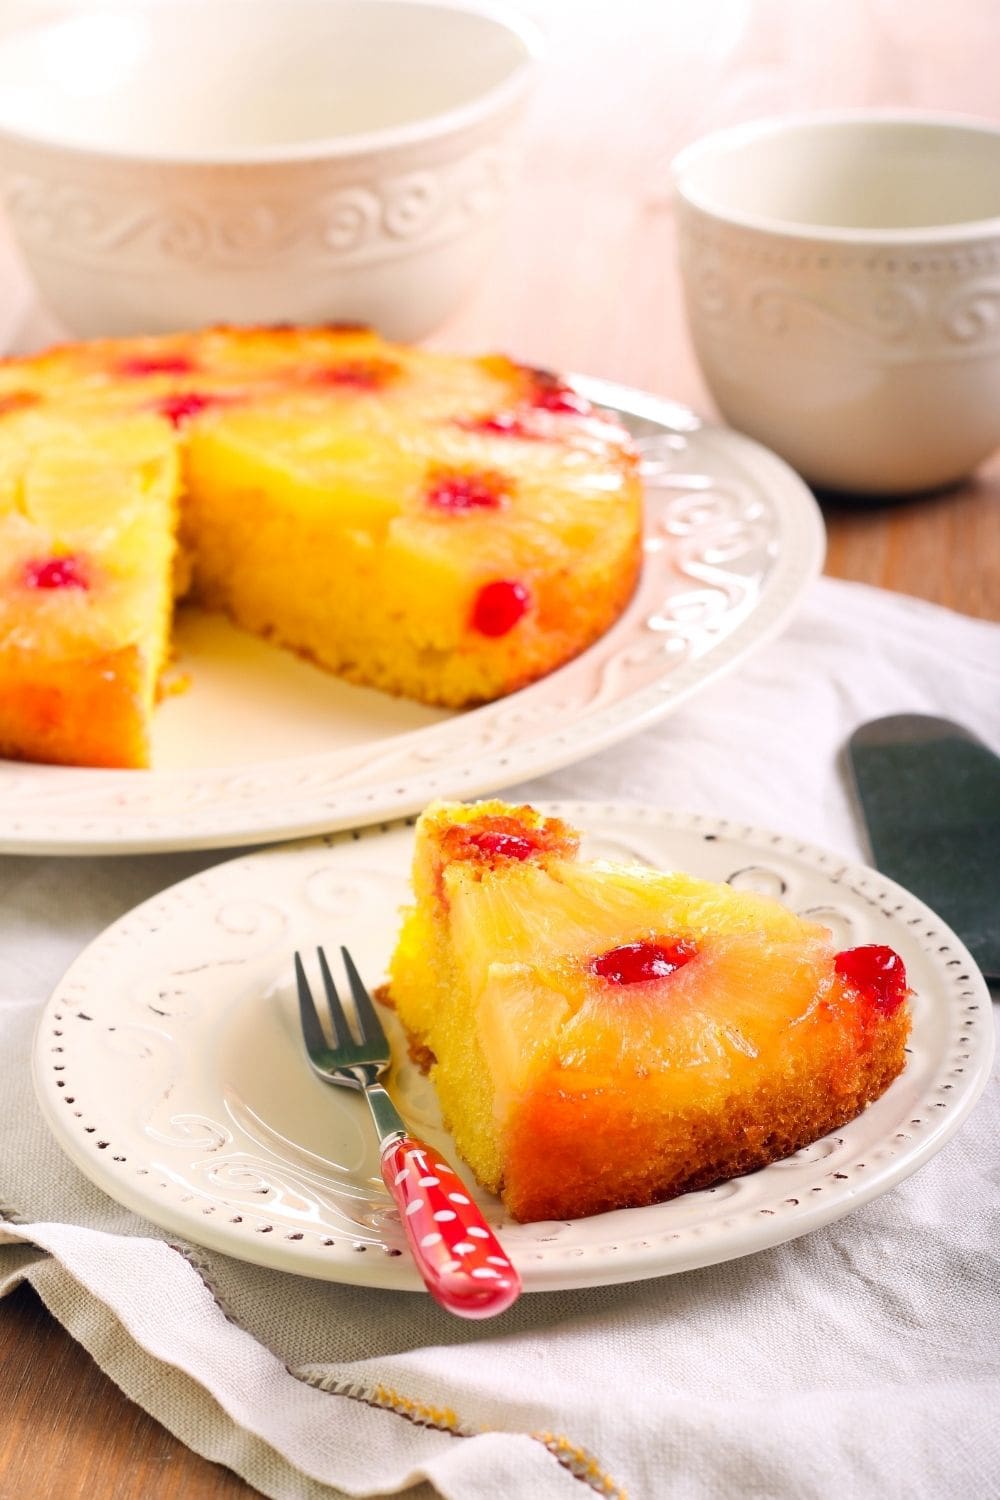 Slice of Pineapple Upside Down Cake on a Plate with a Fork 